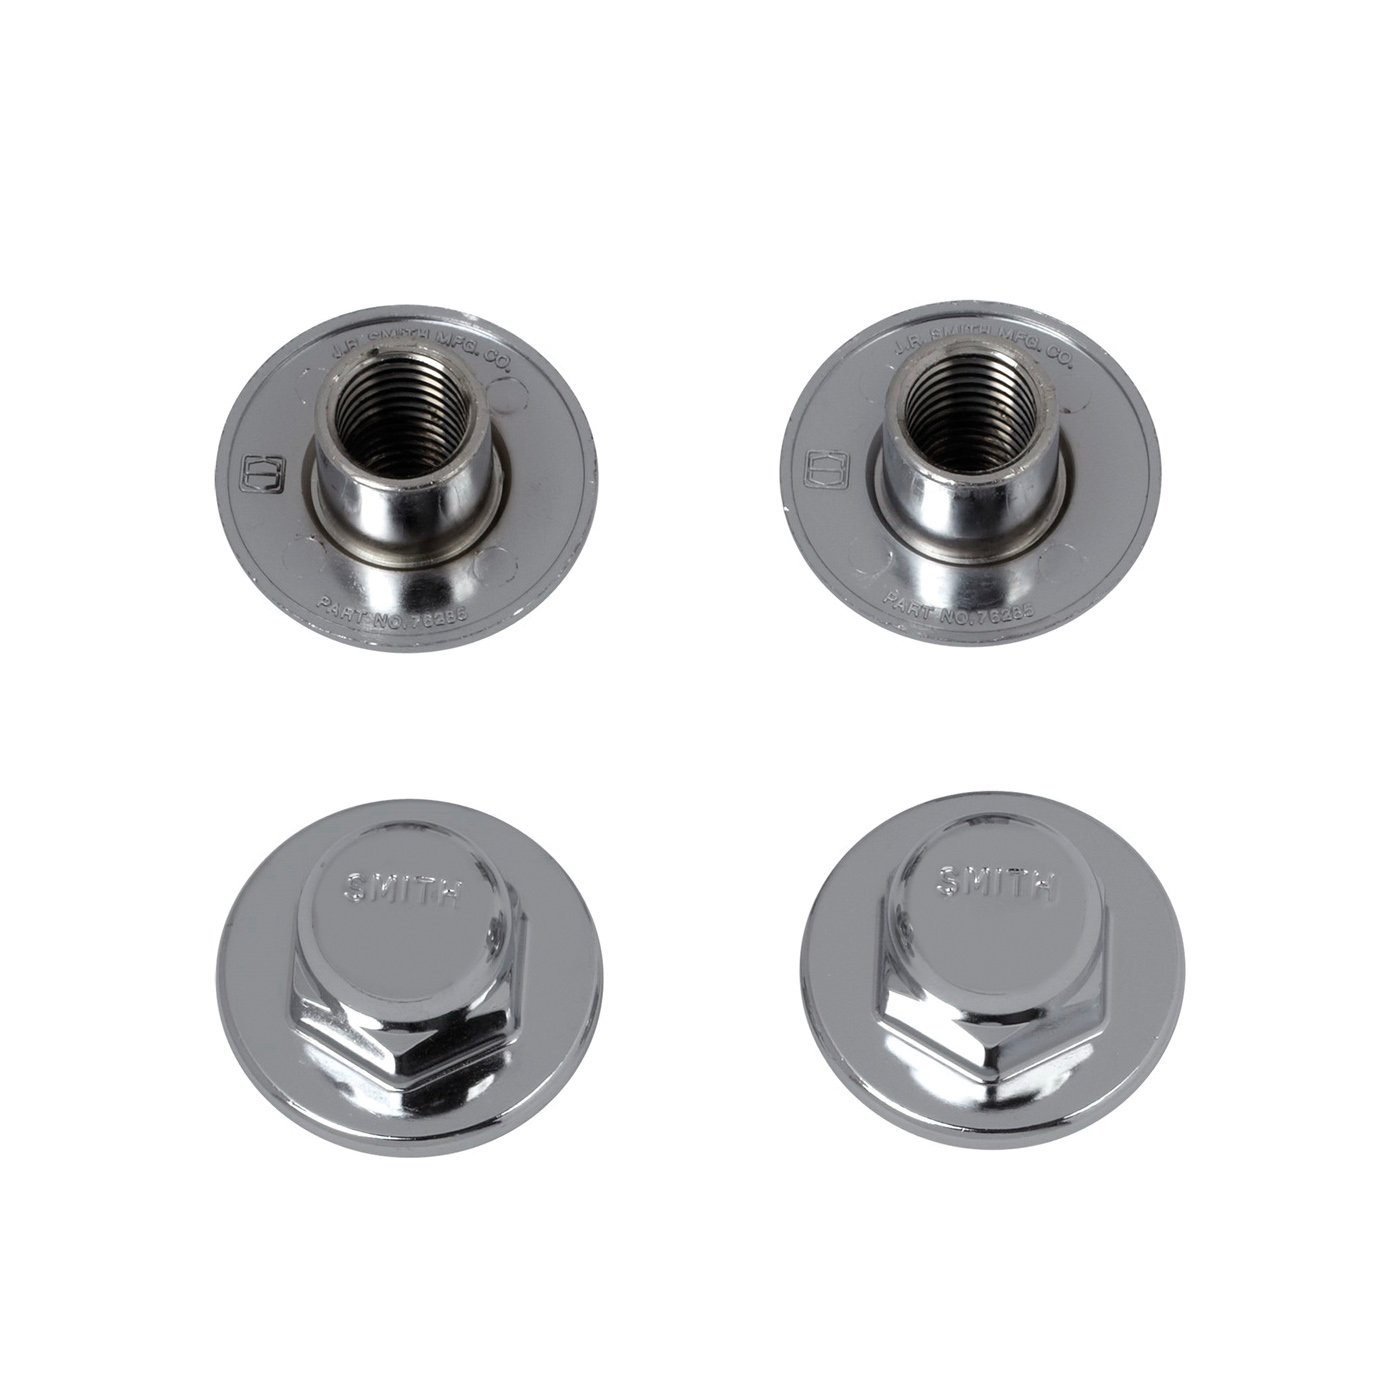 American Standard 7381285-200.0070A Toilet Bolt Caps, For Use With Wall Hung Toilets, Polished Chrome, Import